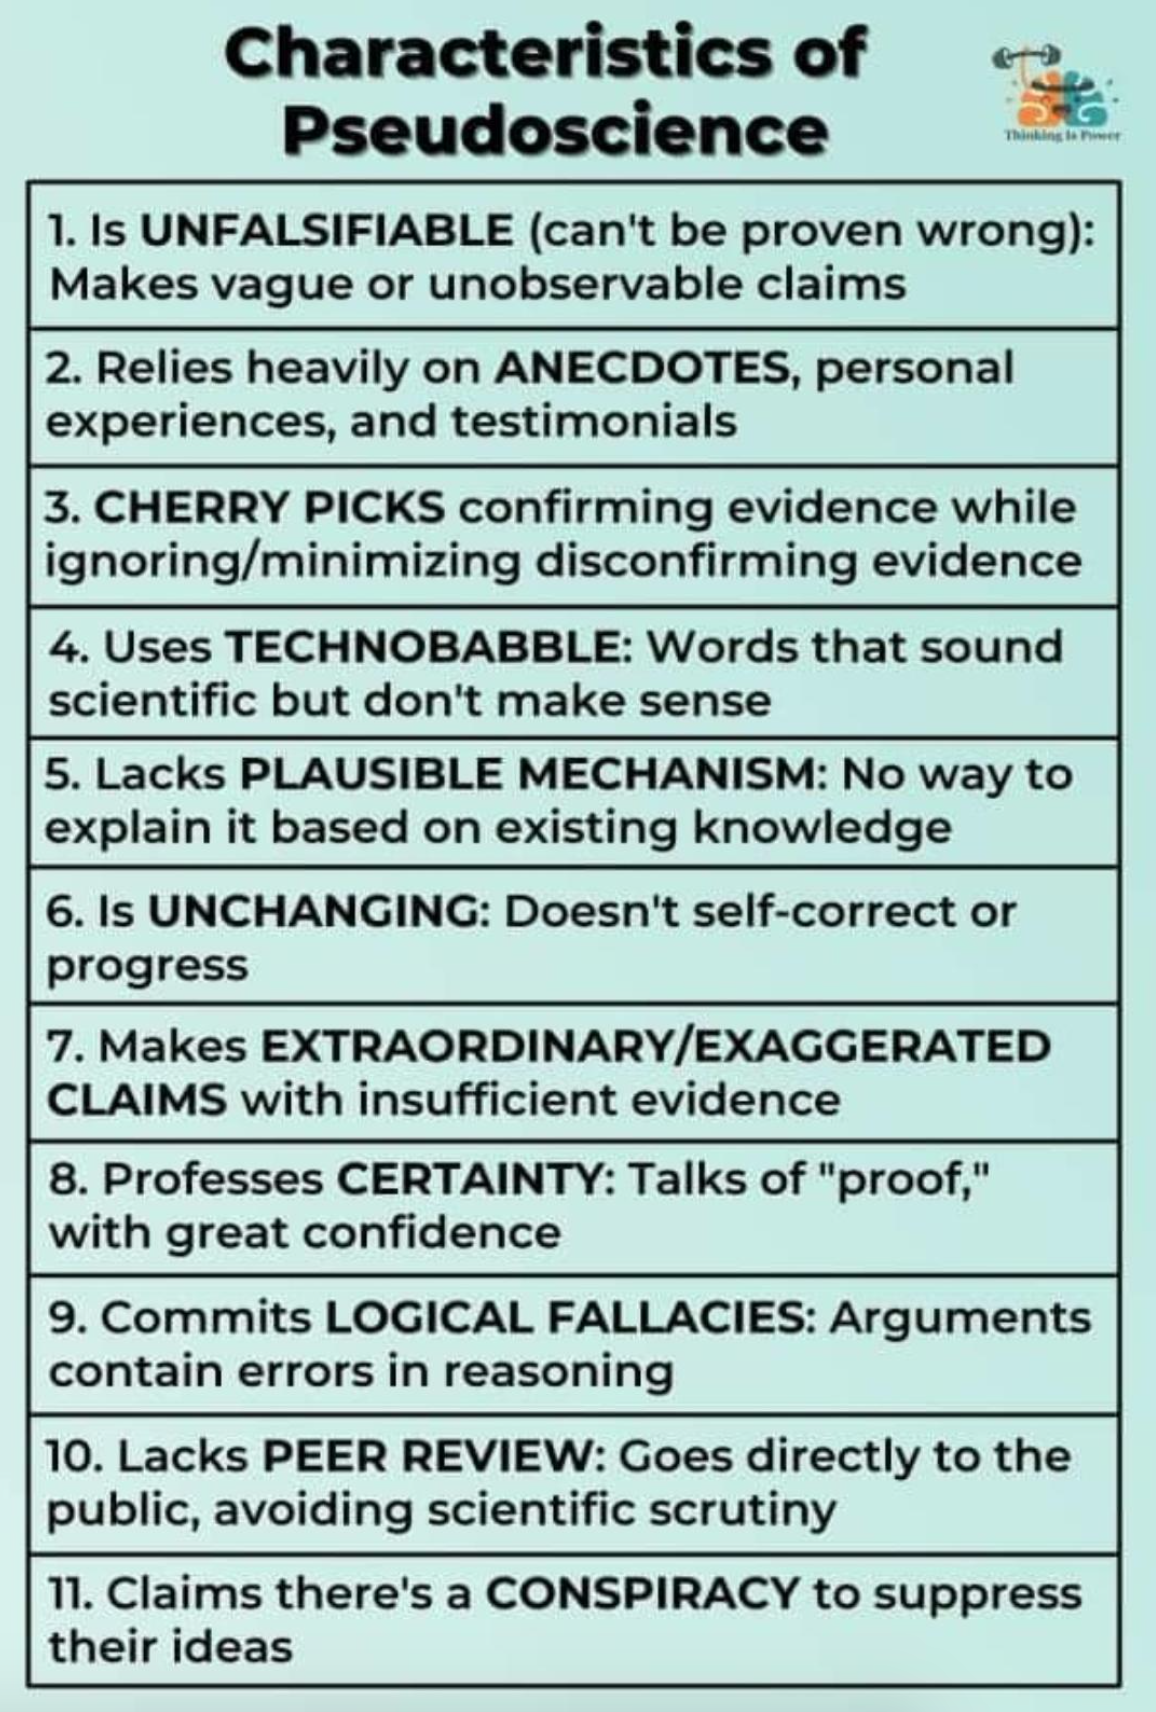 Helpful Guides to life - tularemia - Characteristics of Pseudoscience 1. Is Unfalsifiable can't be proven wrong Makes vague or unobservable claims 2. Relies heavily on Anecdotes, personal experiences, and testimonials 3. Cherry Picks confirming evidence w